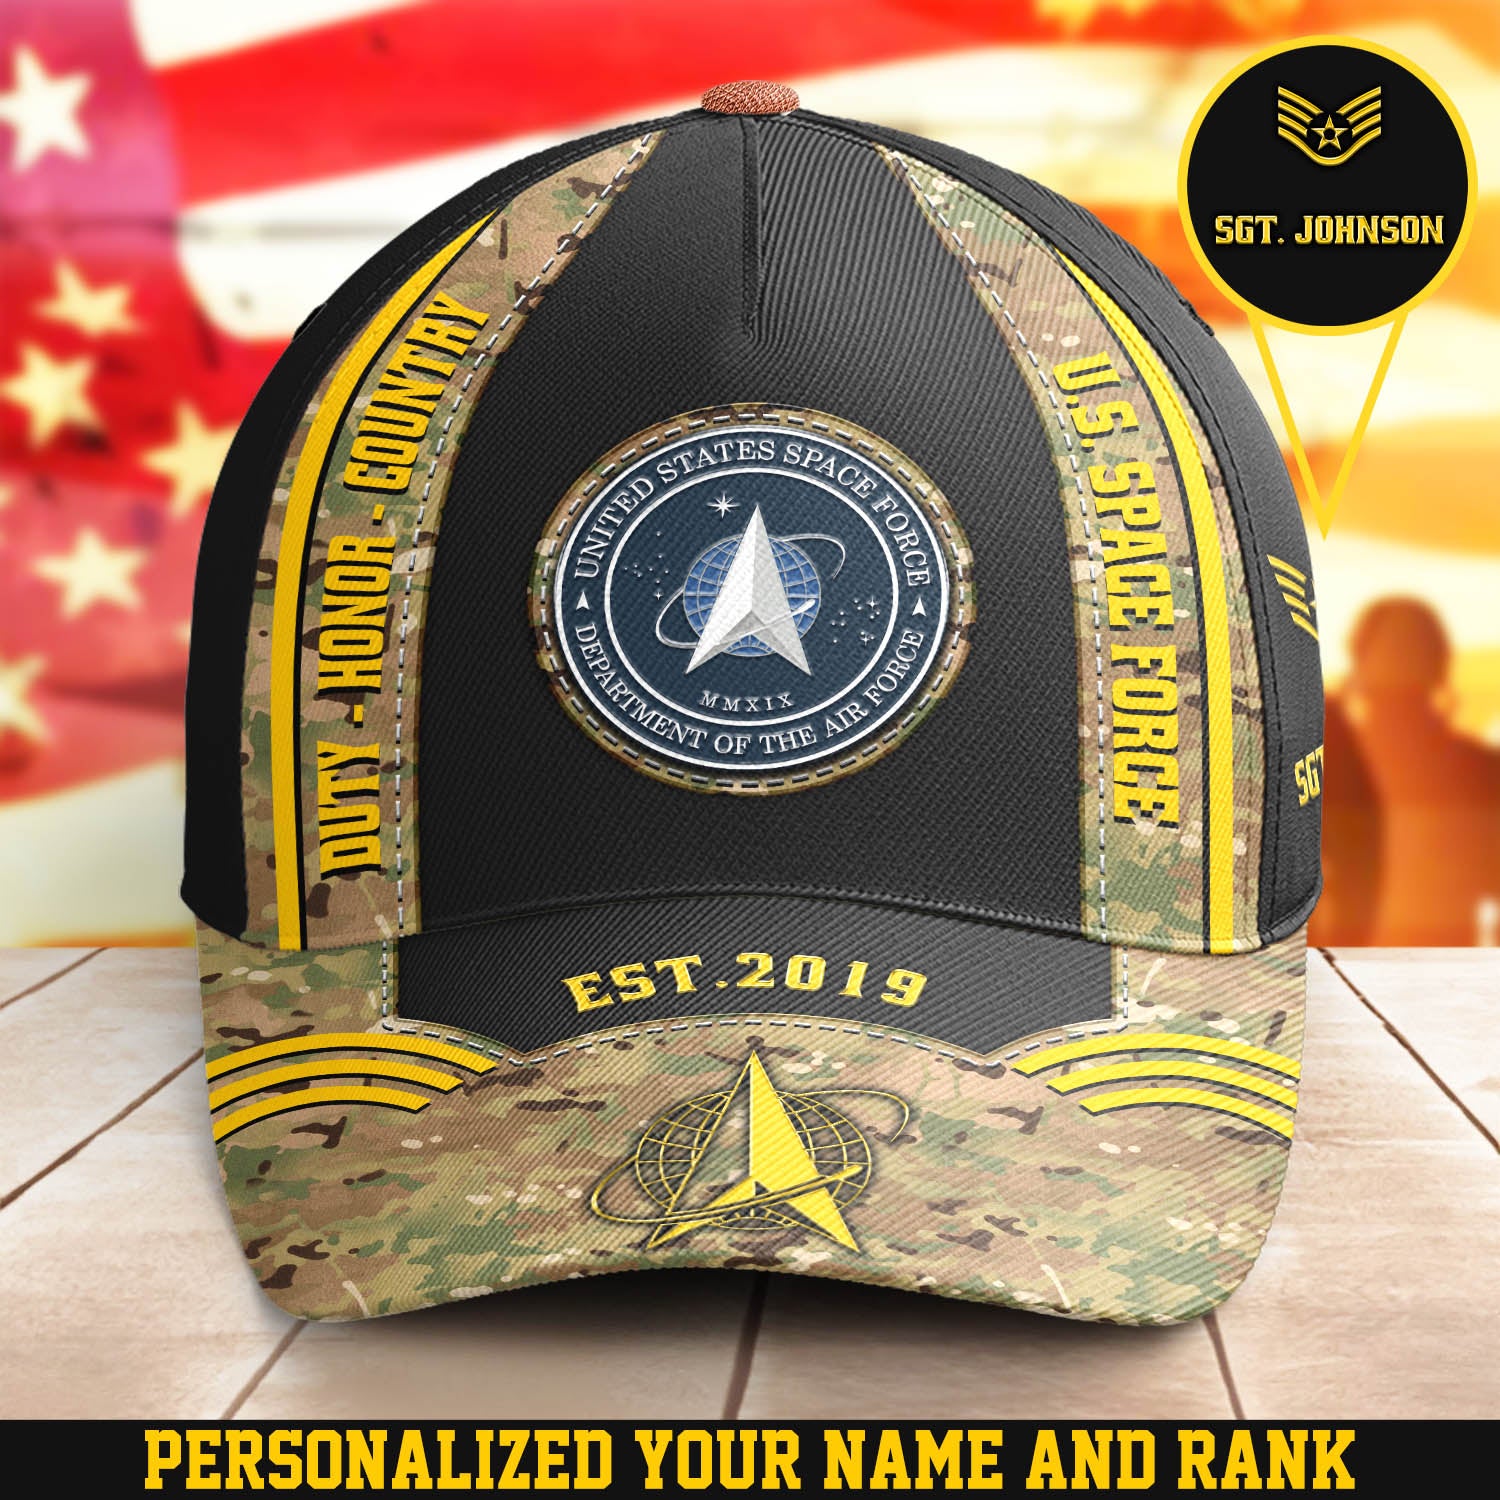 US Space Force Emblem Cap United States Space Force Departmeny Of The Air Force MMXIX Personalized Military Gift